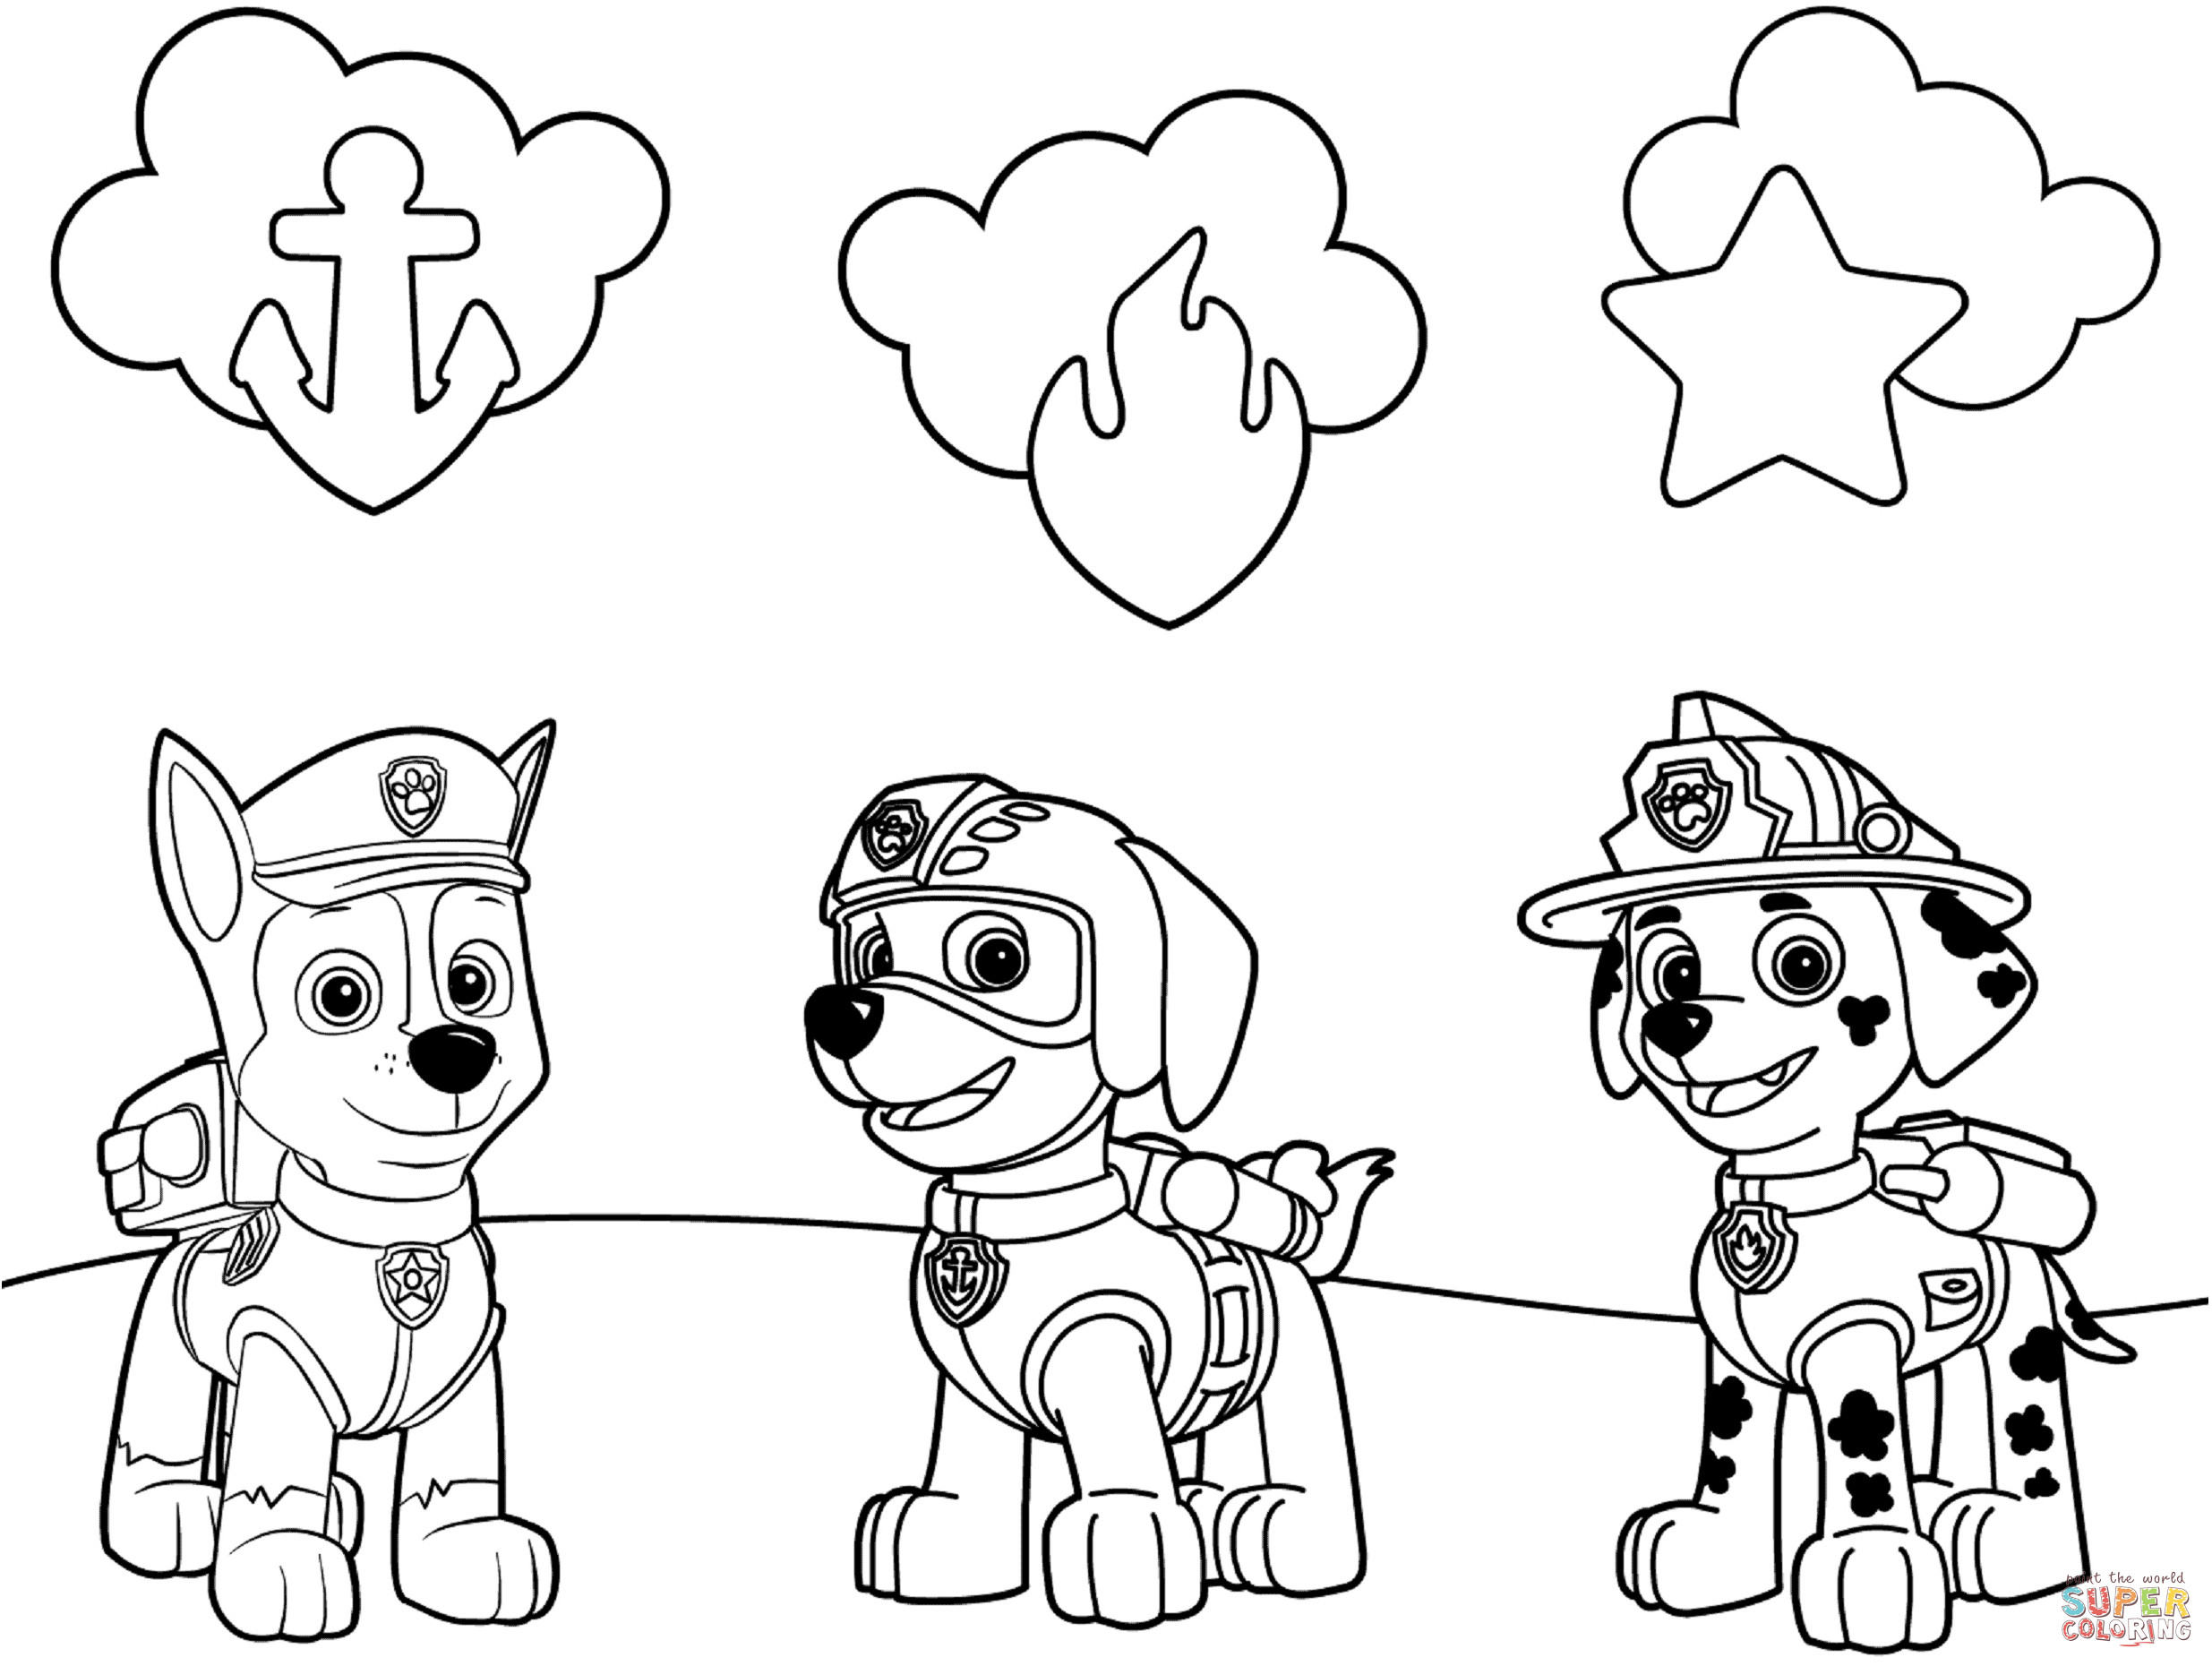 Free Printable Coloring Pages Paw Patrol
 Paw Patrol Badges coloring page